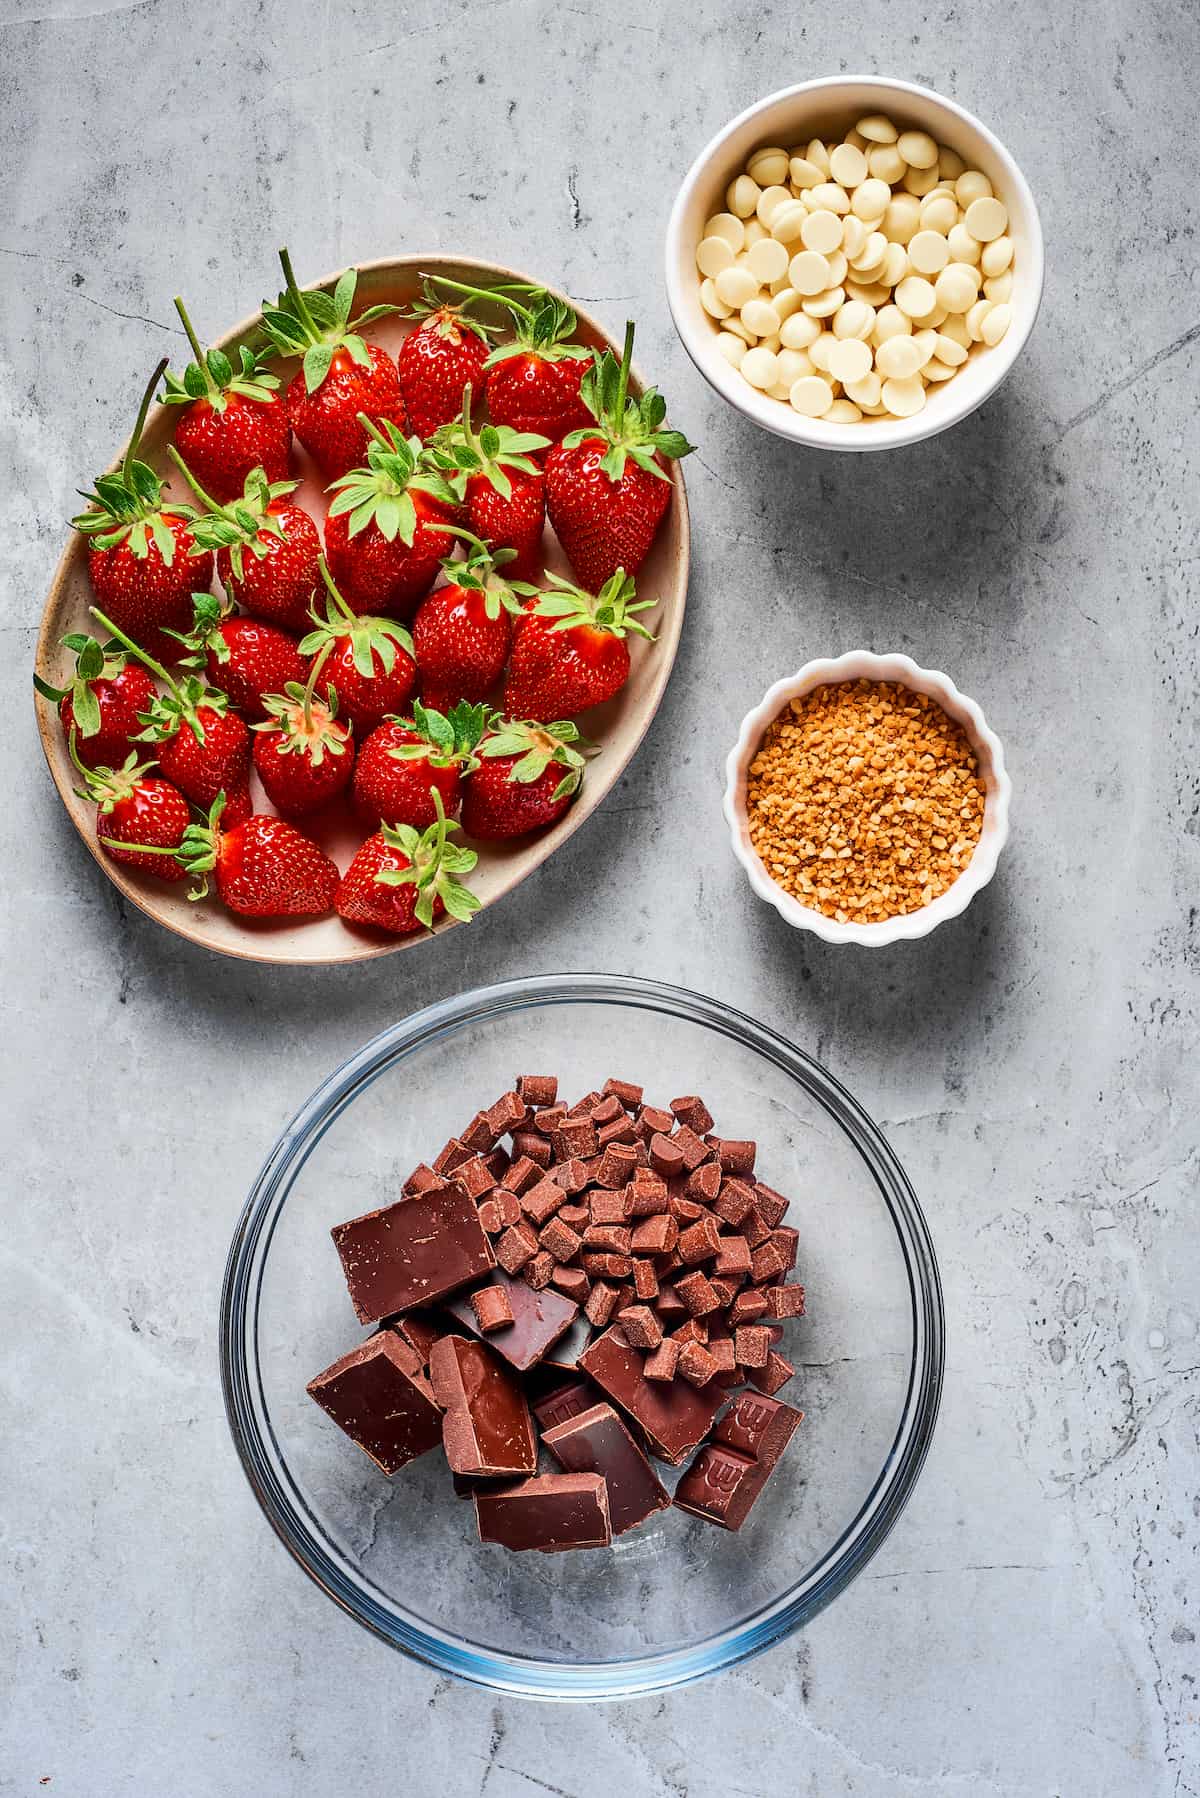 From top left: Fresh strawberries with stems, white chocolate chips, toasted chopped hazelnuts, and bowl with chopped semisweet chocolate and milk chocolate chips.